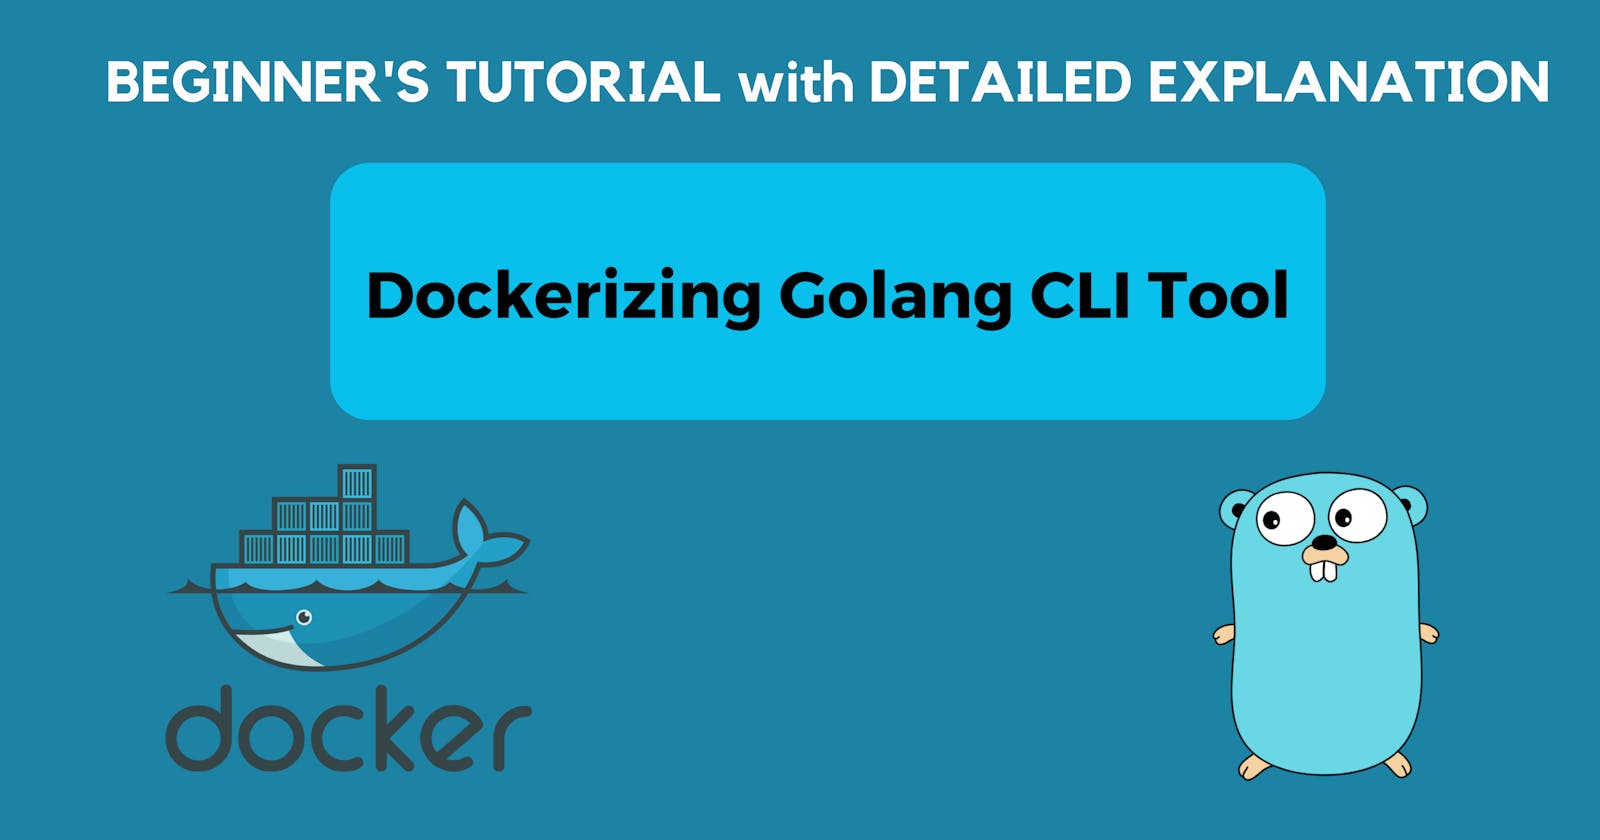 Dockerizing Golang CLI Tool - A Step-by-Step Guide